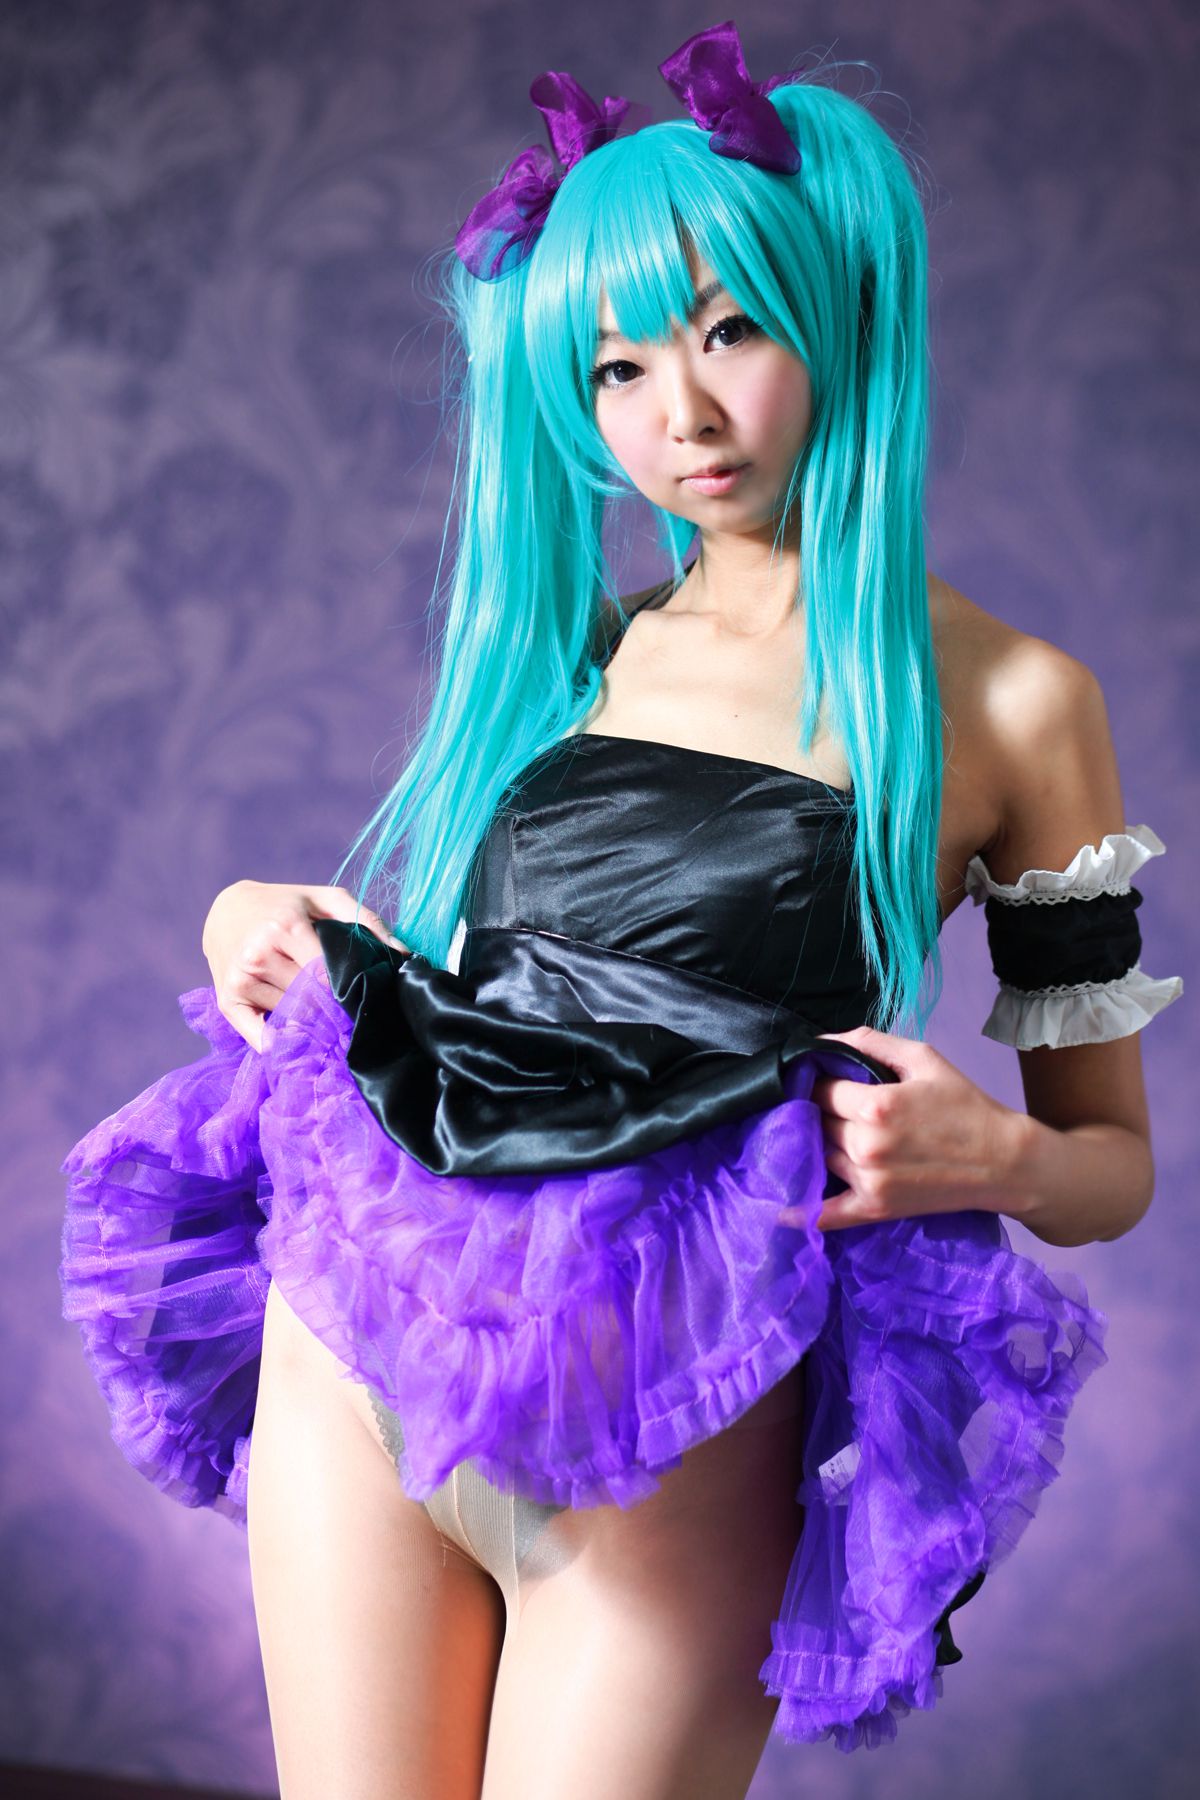 taotuhome[Cosplay] Necoco as Hatsune Miku from Vocaloid 套图第152张